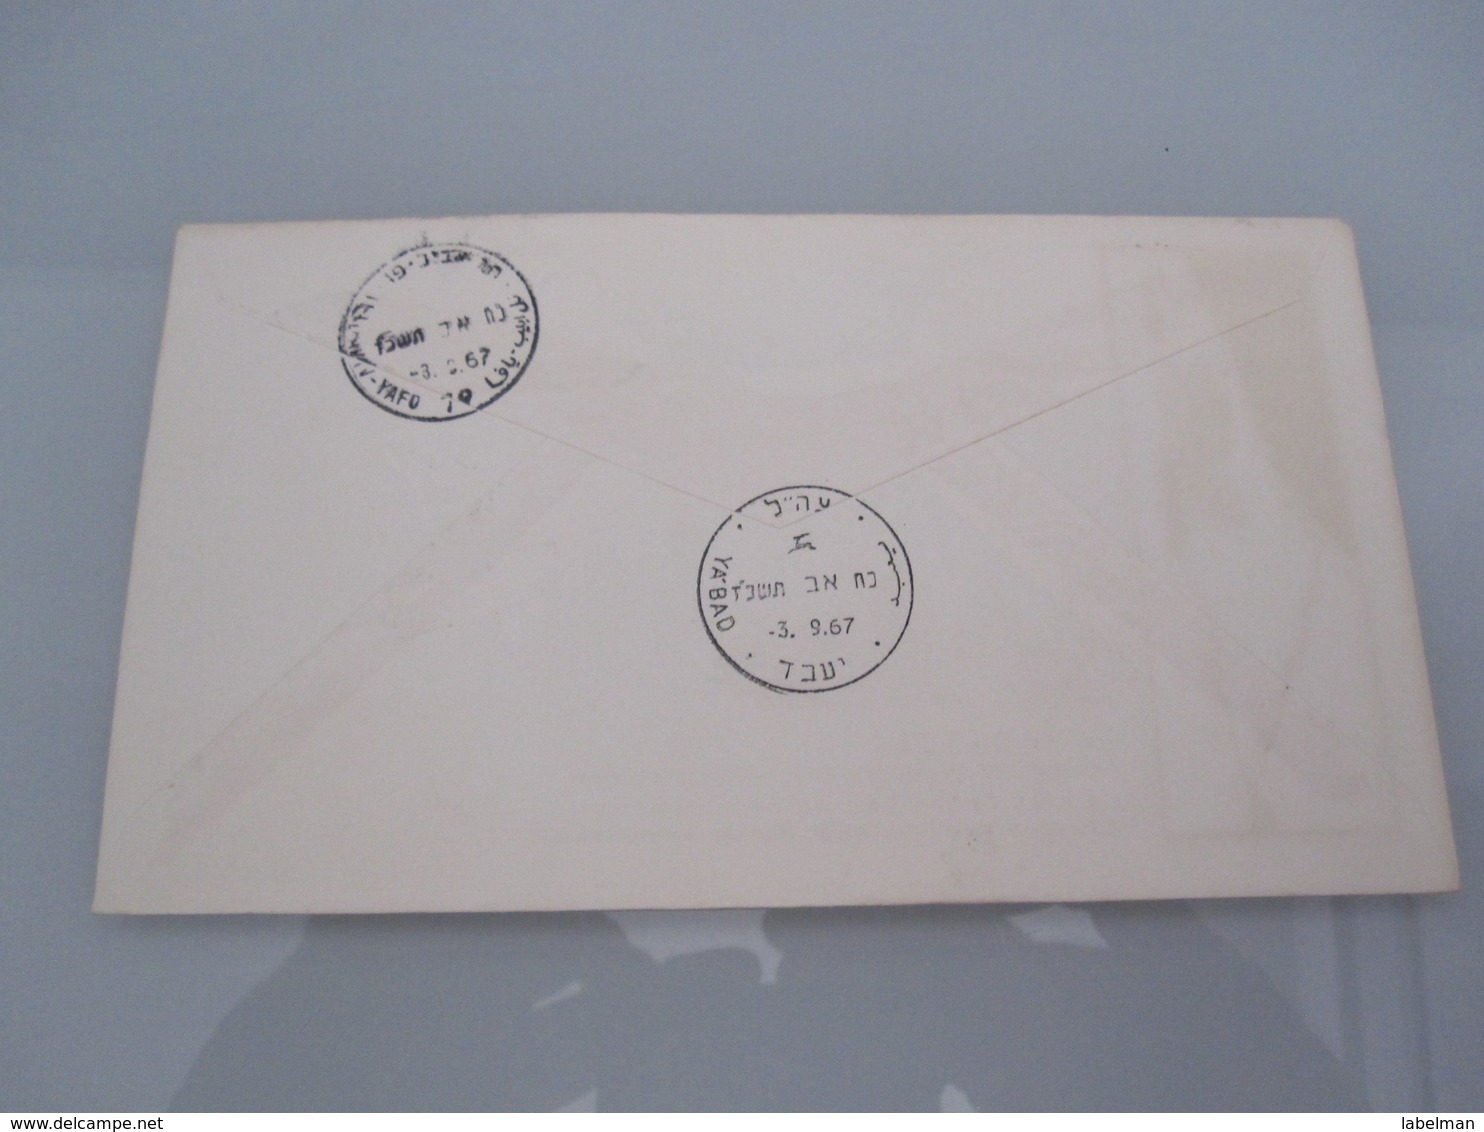 1967 POO FIRST DAY POST OFFICE OPENING YABAD JORDAN PALESTINE ISRAEL MILITARY ADMINISTRATION ENVELOPE COVER CACHET MAP - Covers & Documents